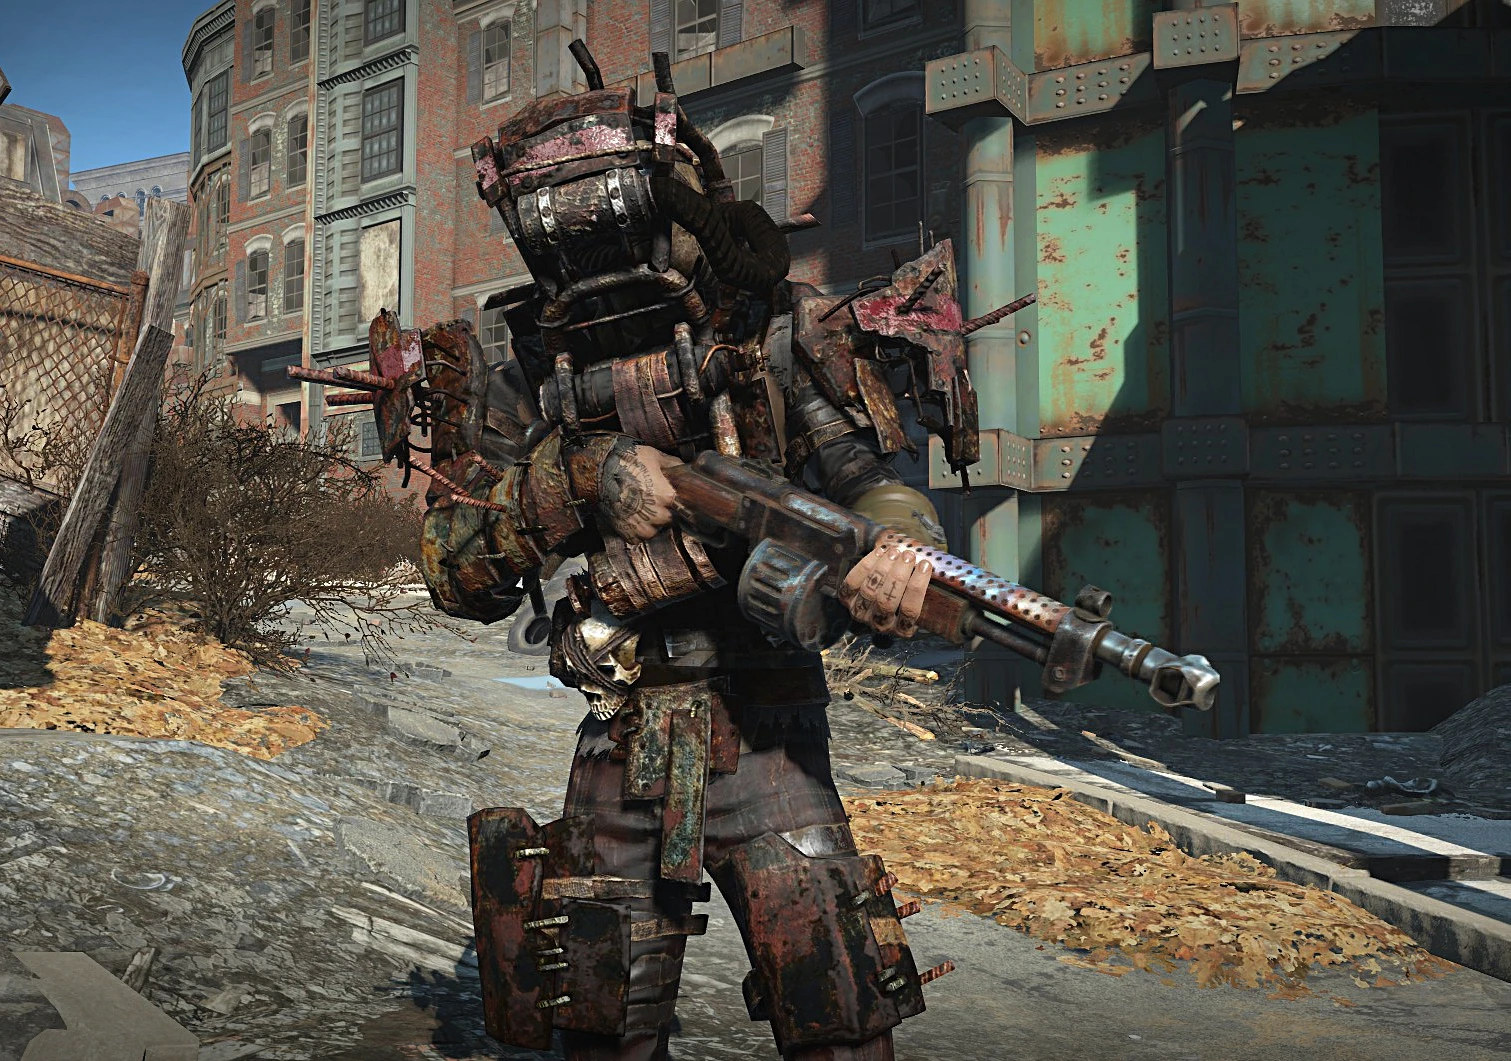 Hd Raider Armor At Fallout 4 Nexus Mods And Community All in one Photos.